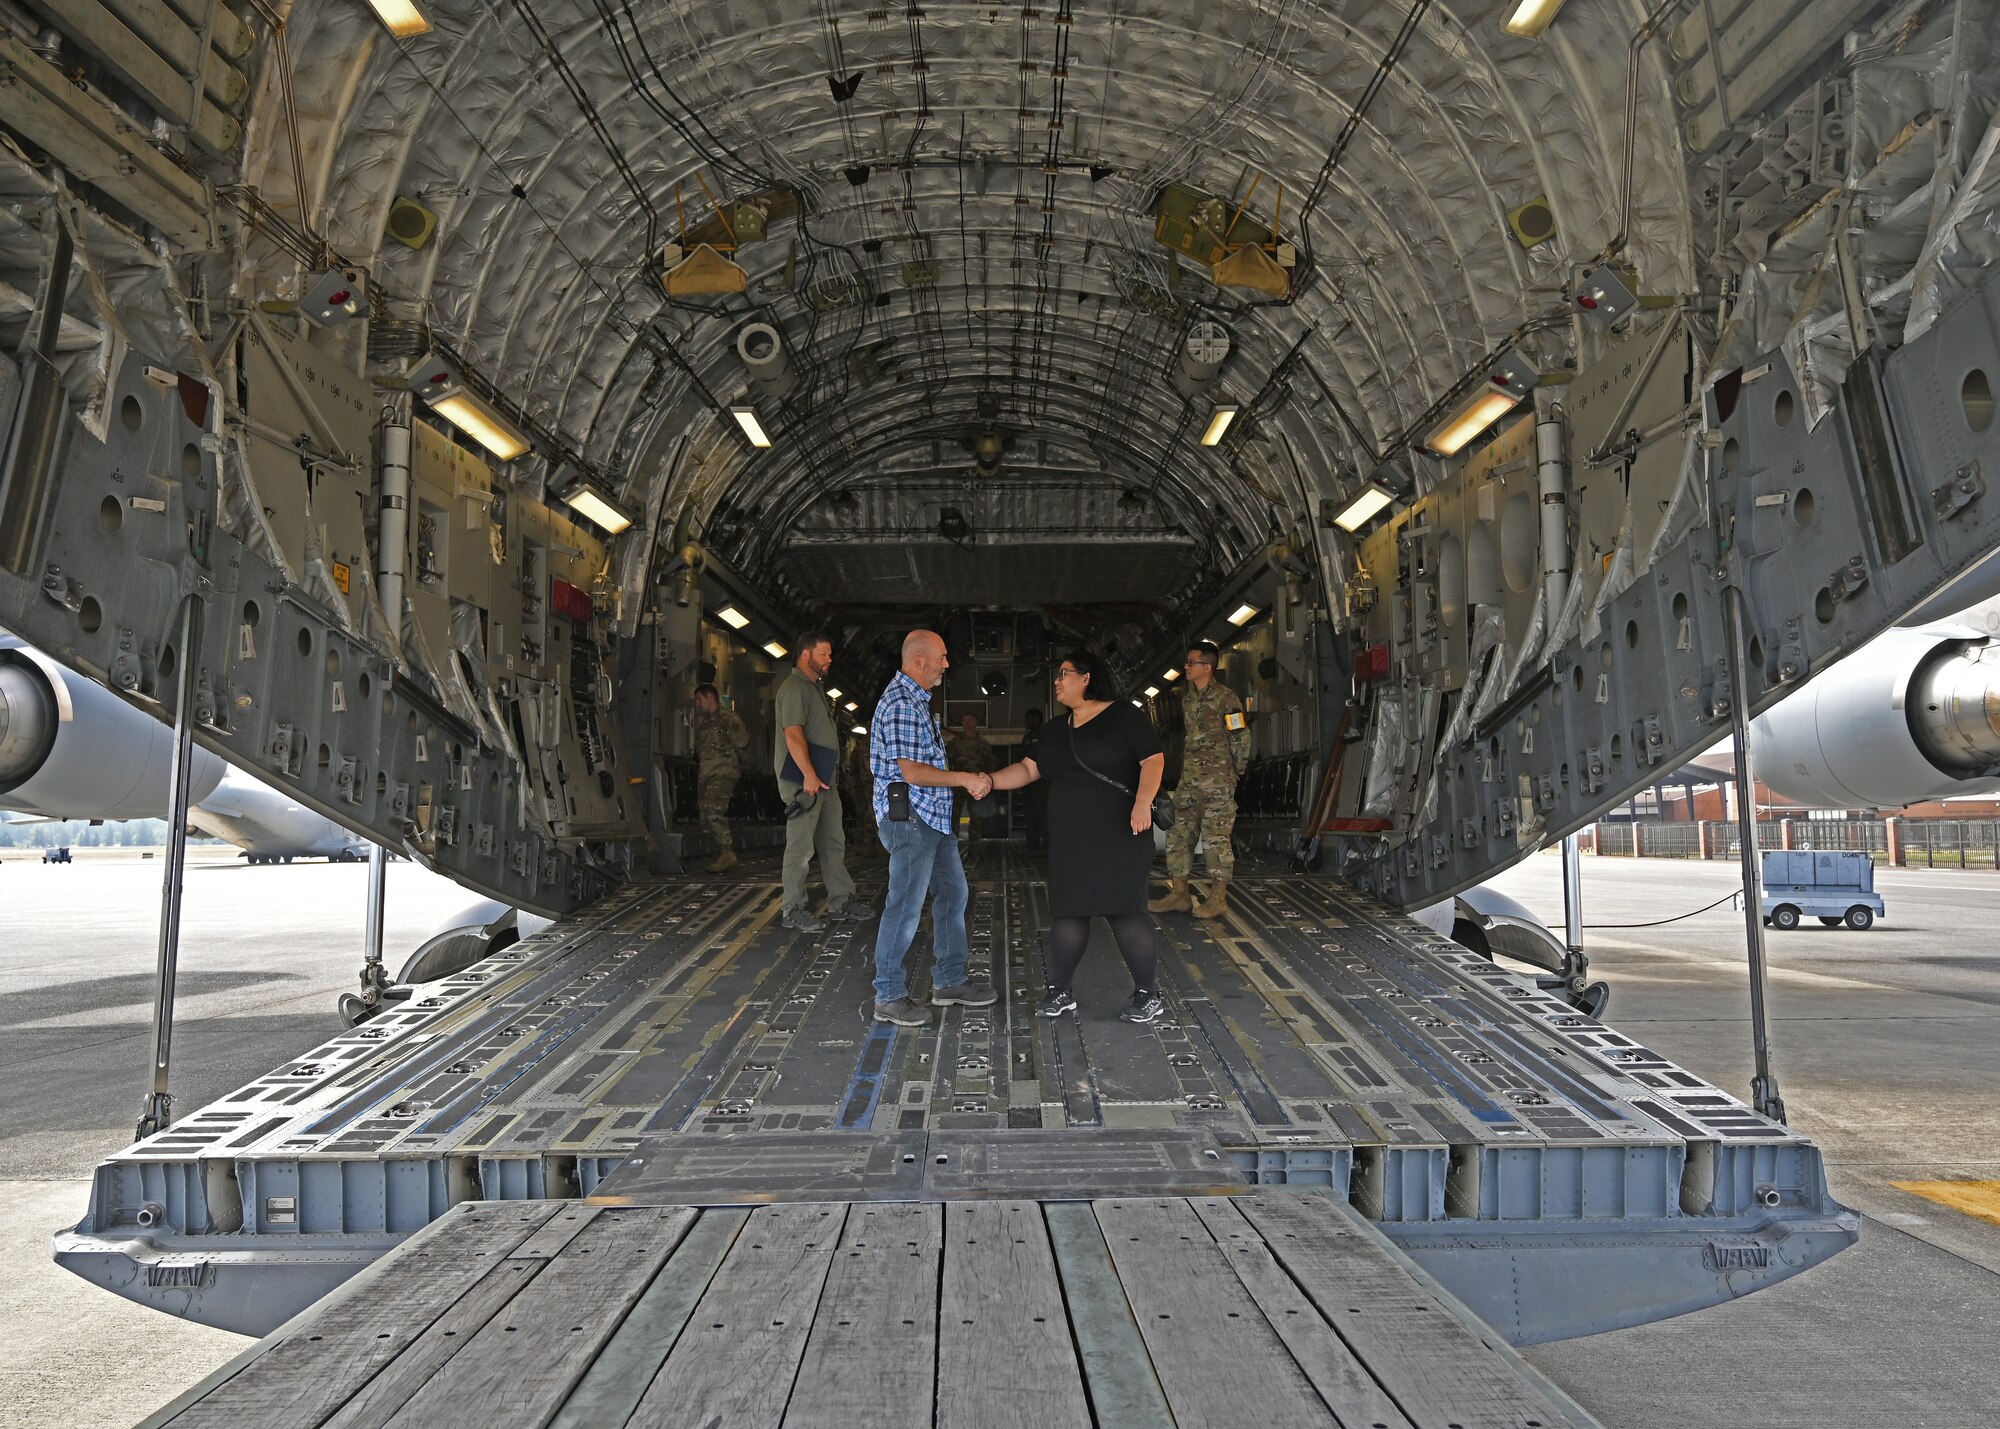 Betsy Dudley, military legislative assistant to U.S. Rep. Marilyn Strickland (WA-10), tours a C-17 Globemaster III with Jerry Miller, Prime Nuclear Airlift Force program coordinator with the 62nd Aerial Port Squadron, at Joint Base Lewis-McChord, Washington, July 6, 2021. Dudley oversees an issue portfolio encompassing defense, foreign affairs, veterans and intelligence issues. (U.S. Air Force photo by Airman 1st Class Callie Norton)